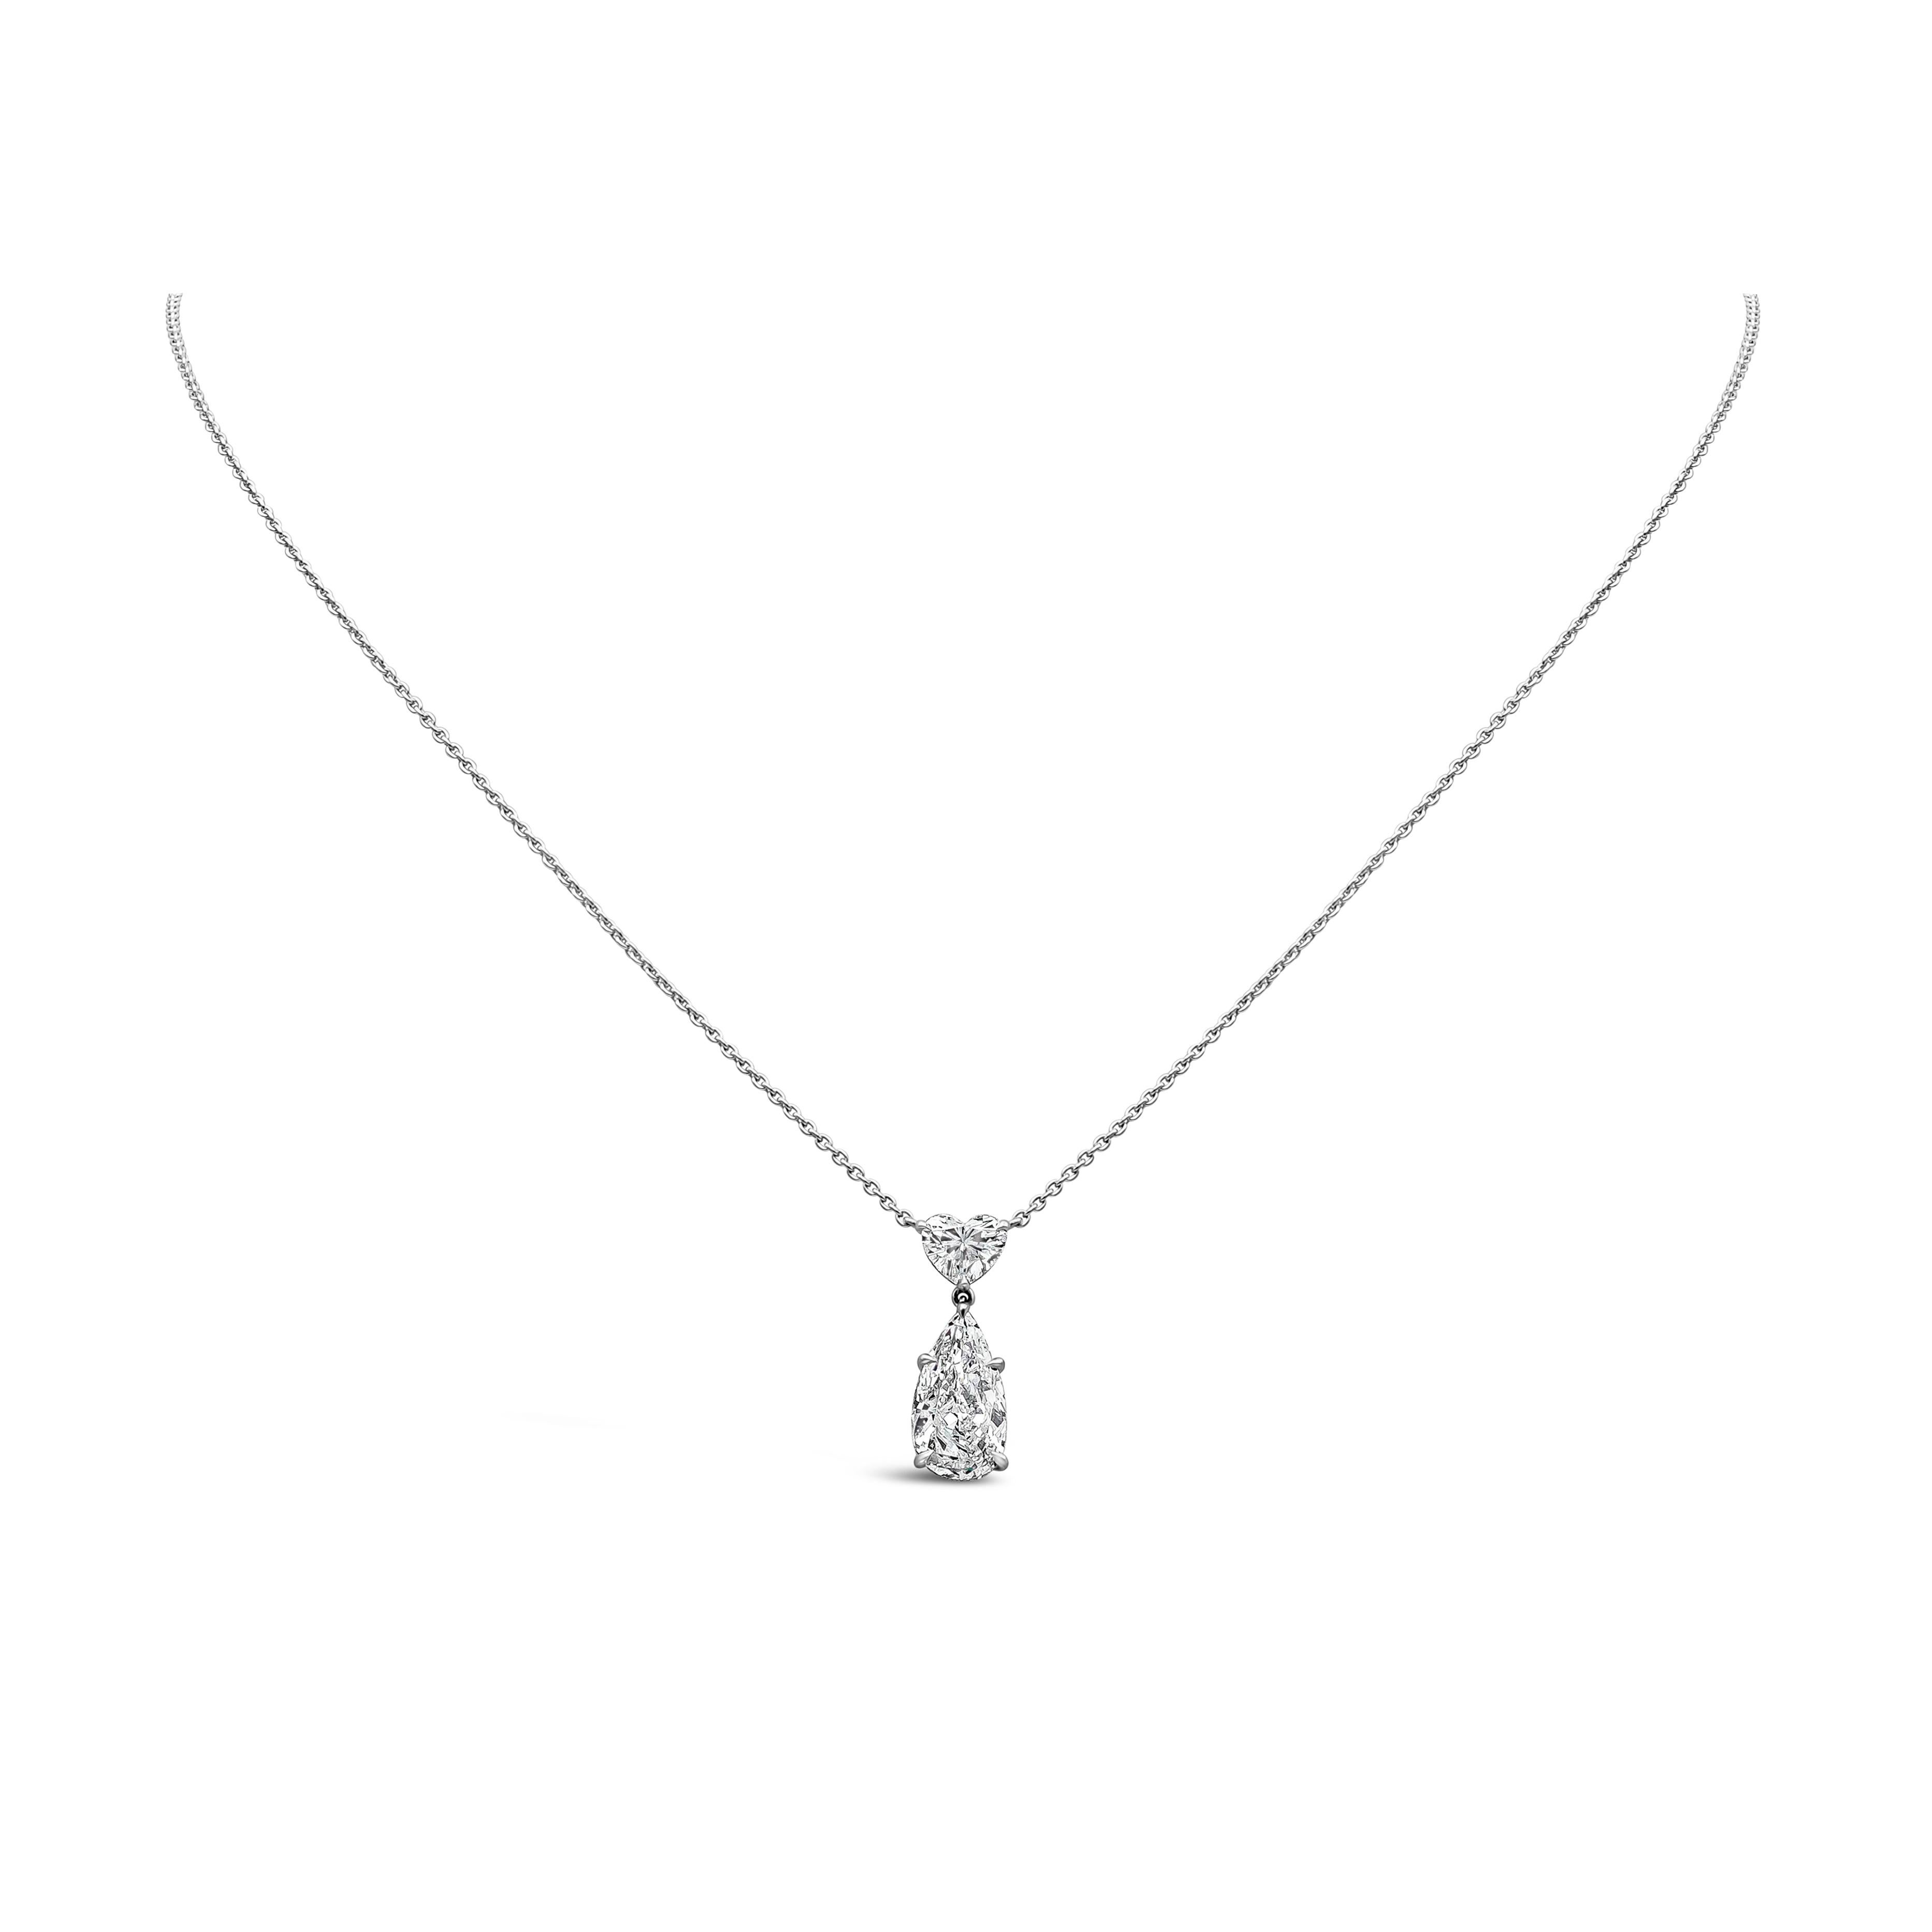 This simple and beautiful drop pendant necklace showcases a 2.00 carat Pear shape, H color SI1 clarity, hanging from a 0.60 carat Heart shape diamond. Connected to a platinum chain. 16 inches in Length, adjustable upon request.

Roman Malakov is a